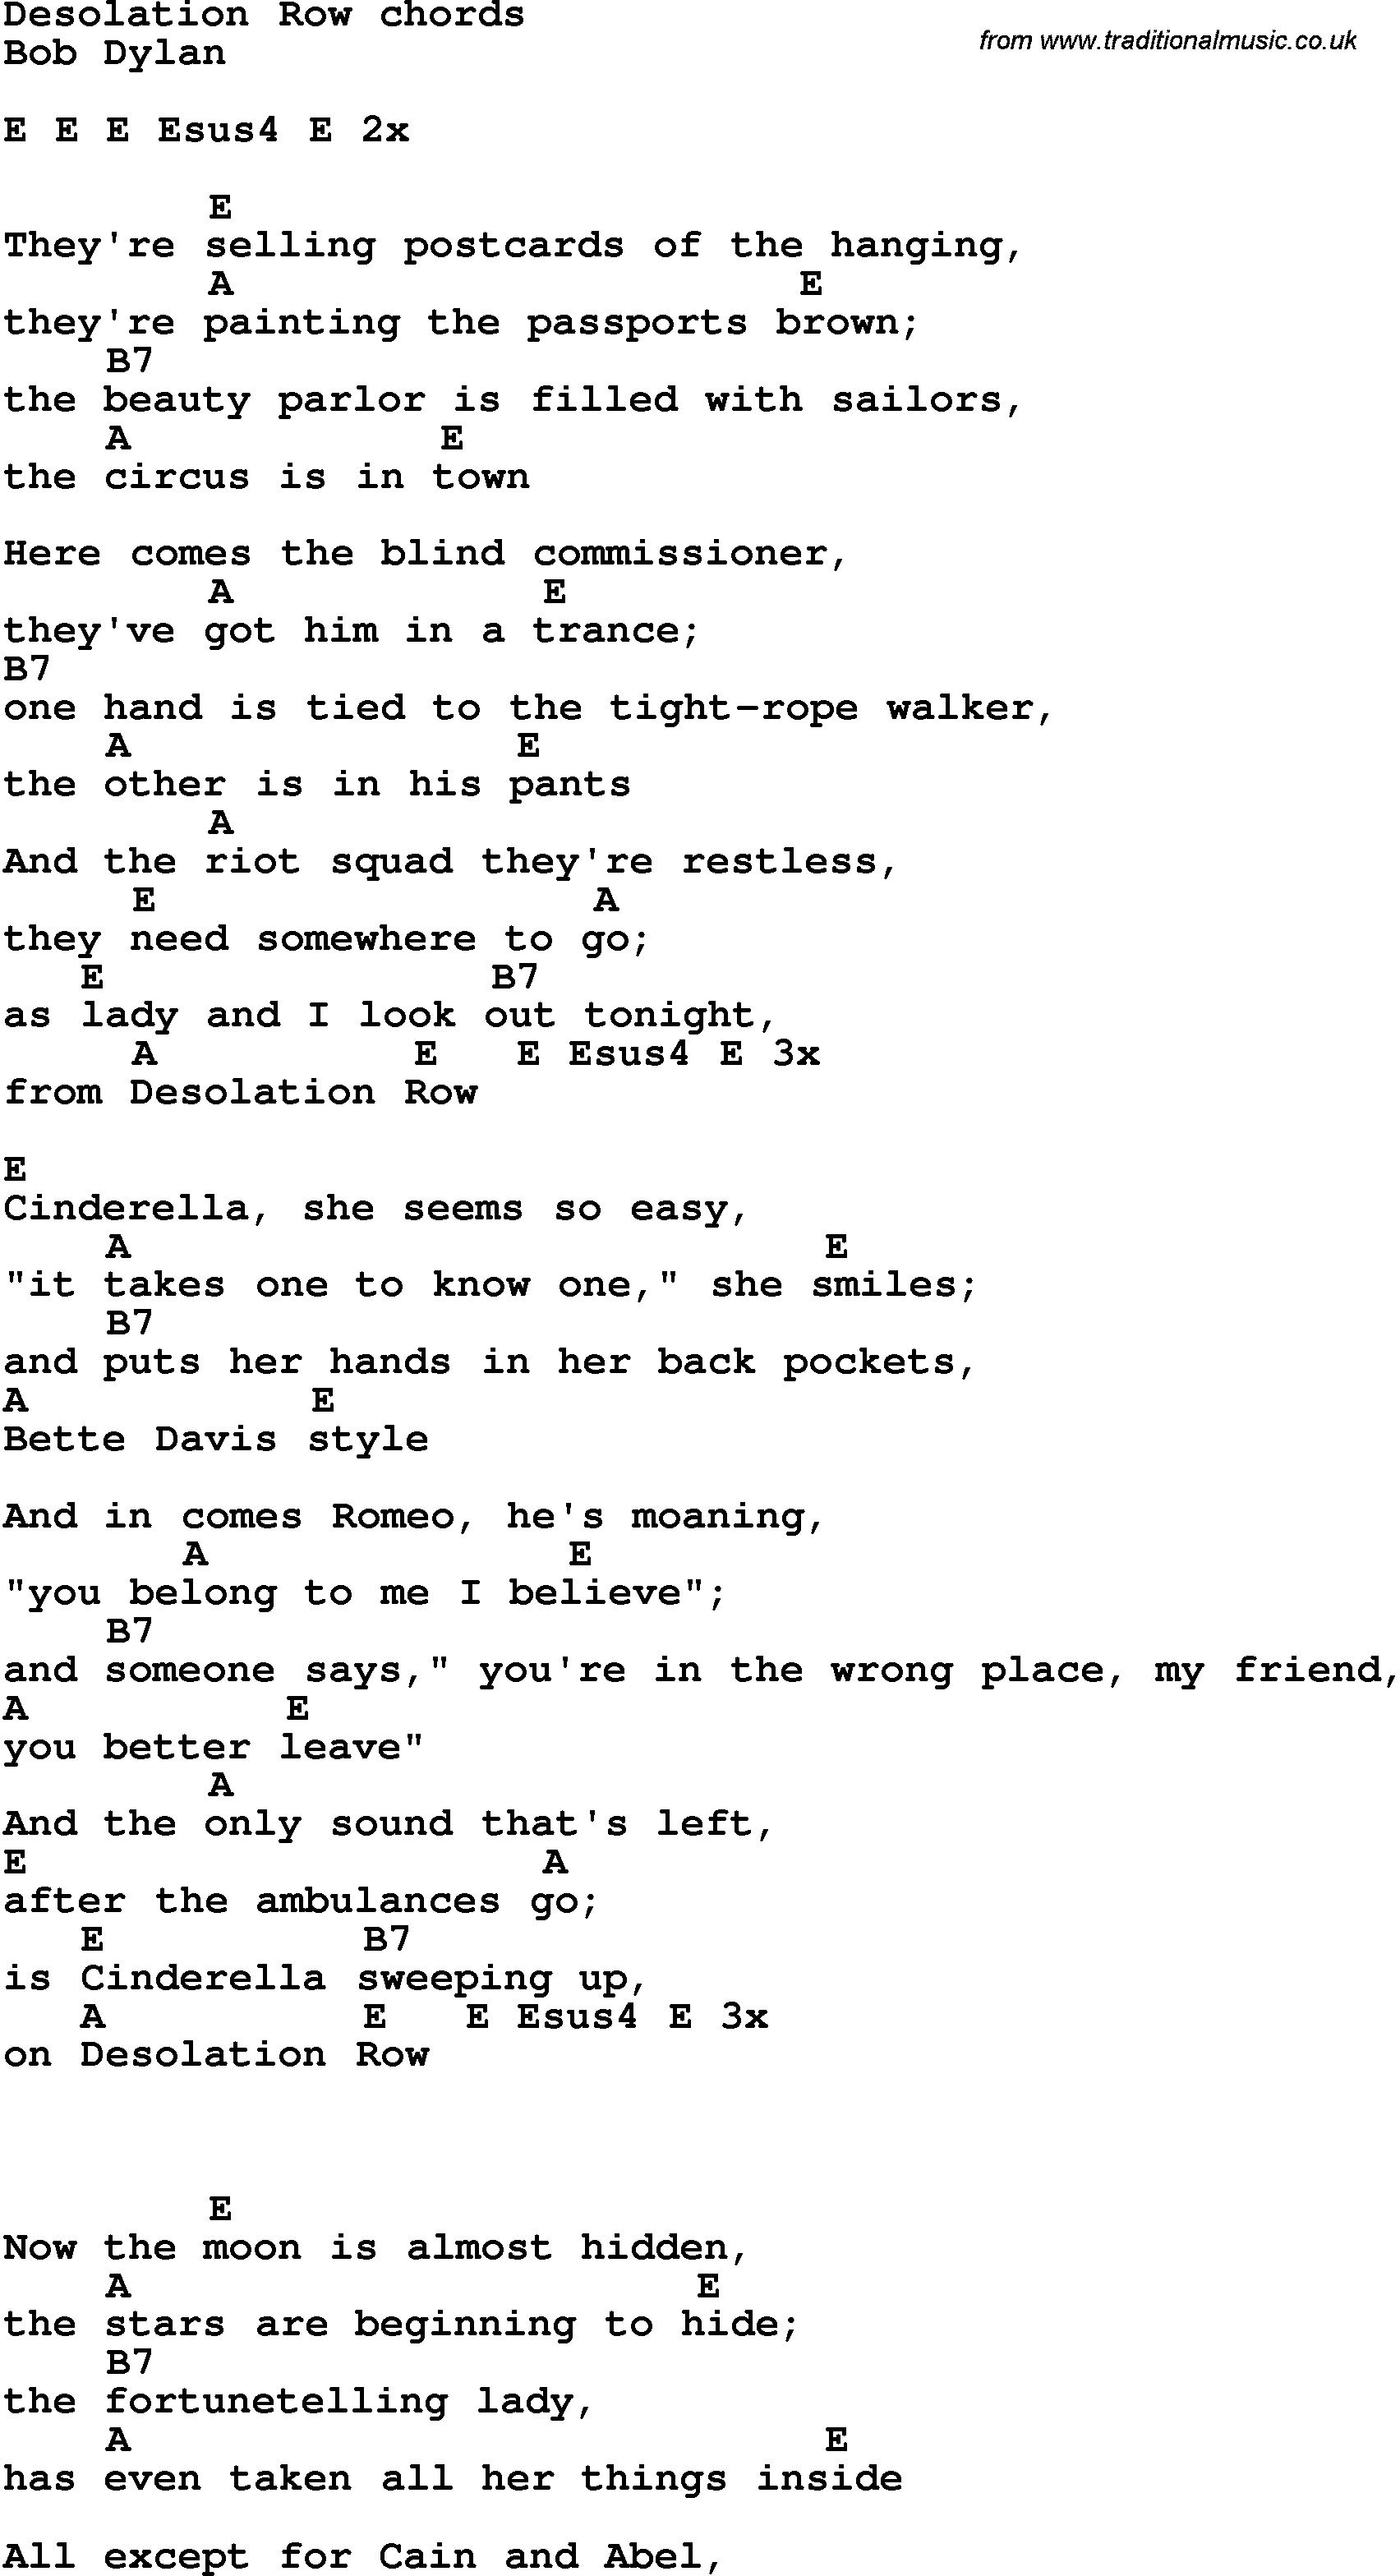 Song Lyrics with guitar chords for Desolation Row